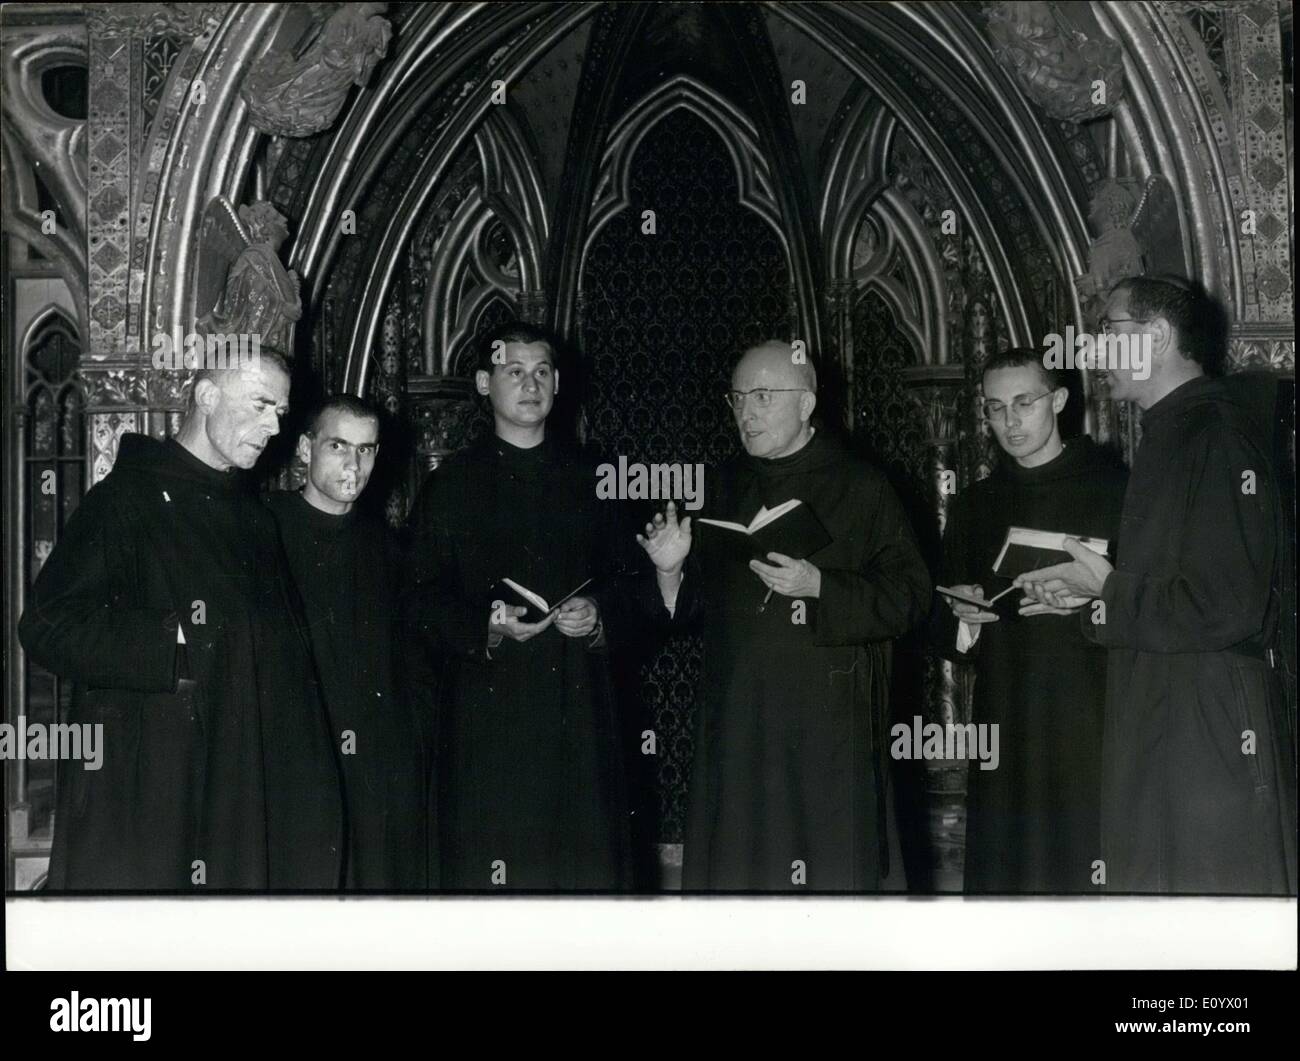 Aug. 25, 1971 - This takes place at the 6th festival of Paris. Since Latin was banished to churches for Dominican masses, Gregorian chants are only practiced in monasteries and abbeys. For the first time, the monks chant outside the abbey. Stock Photo